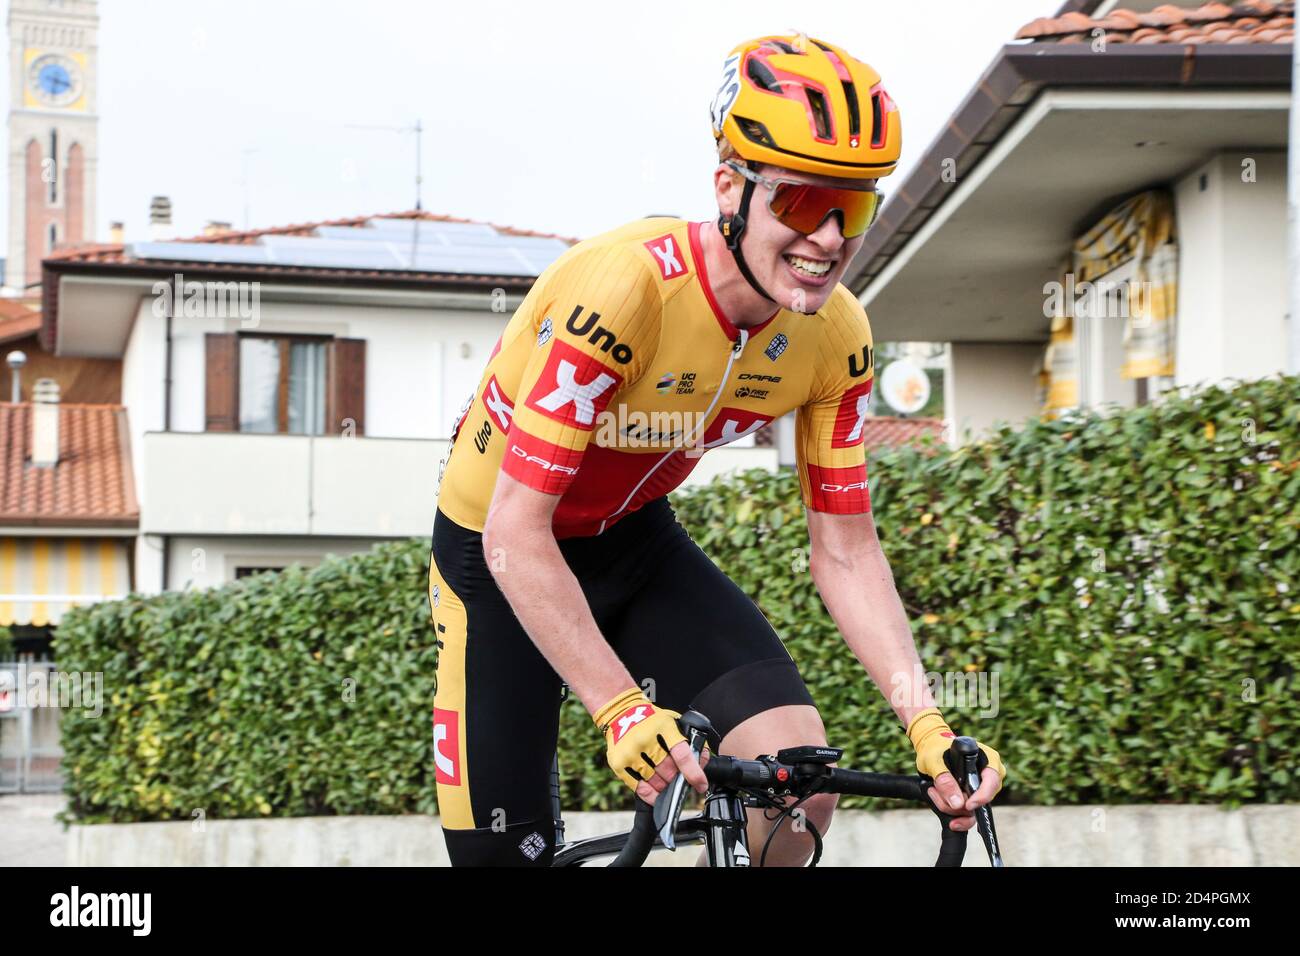 buja, Italy, 10 Oct 2020, Andreas Leknessund - Uno XPro Cycling Team racing for the leadership during Under 23 Elite - In line race - Road Race San Vito al Tagliamento - Buja, Street Cycling - Credit: LM/Luca Tedeschi/Alamy Live News Stock Photo